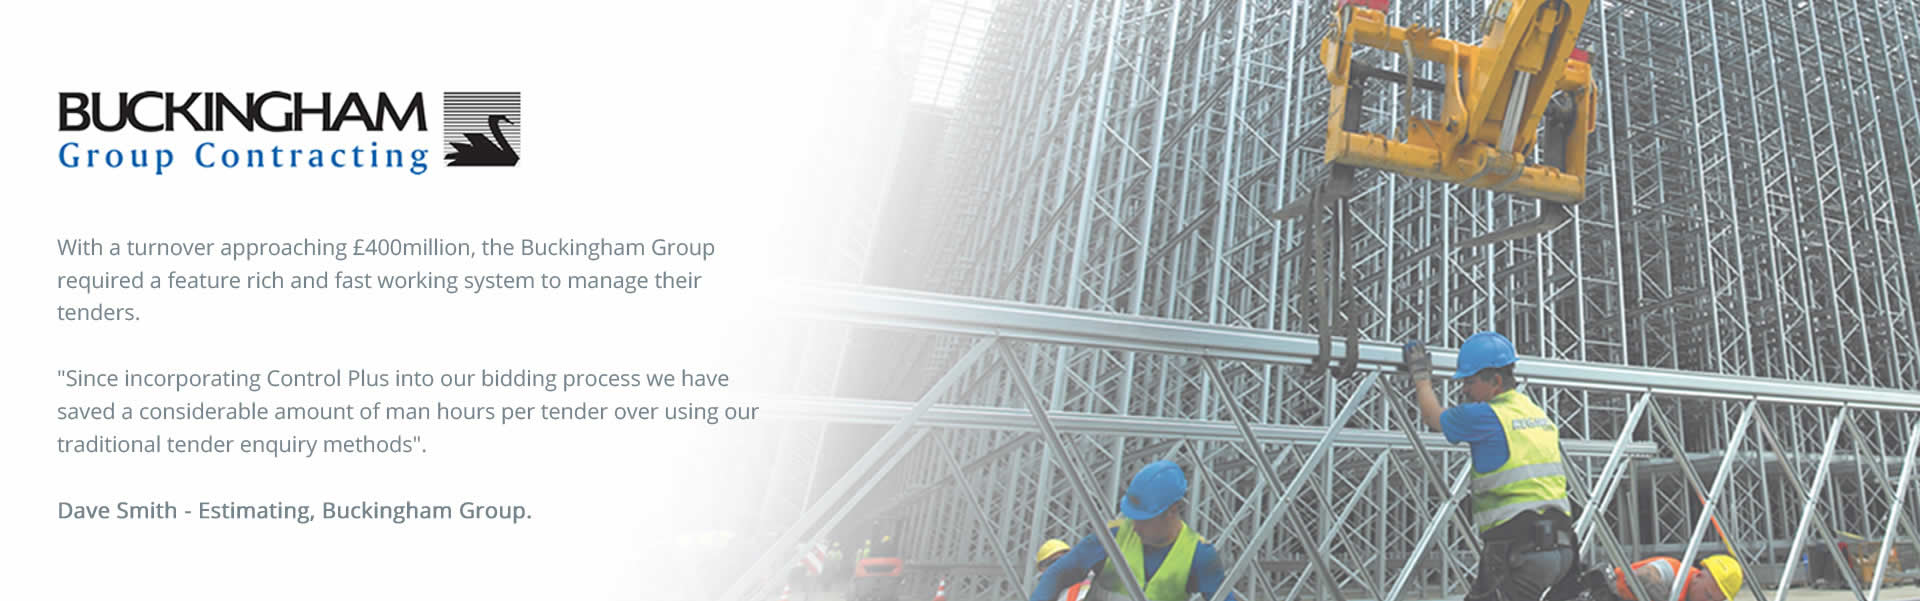 With a turnover approaching £400million, the Buckingham Group required a feature rich and fast working system to manage their tenders. Since incorporating Control Plus into our bidding process we have saved a considerable amount of man hours per tender over using our traditional tender enquiry methods. - Dave Smith (Estimating), Buckingham Group.